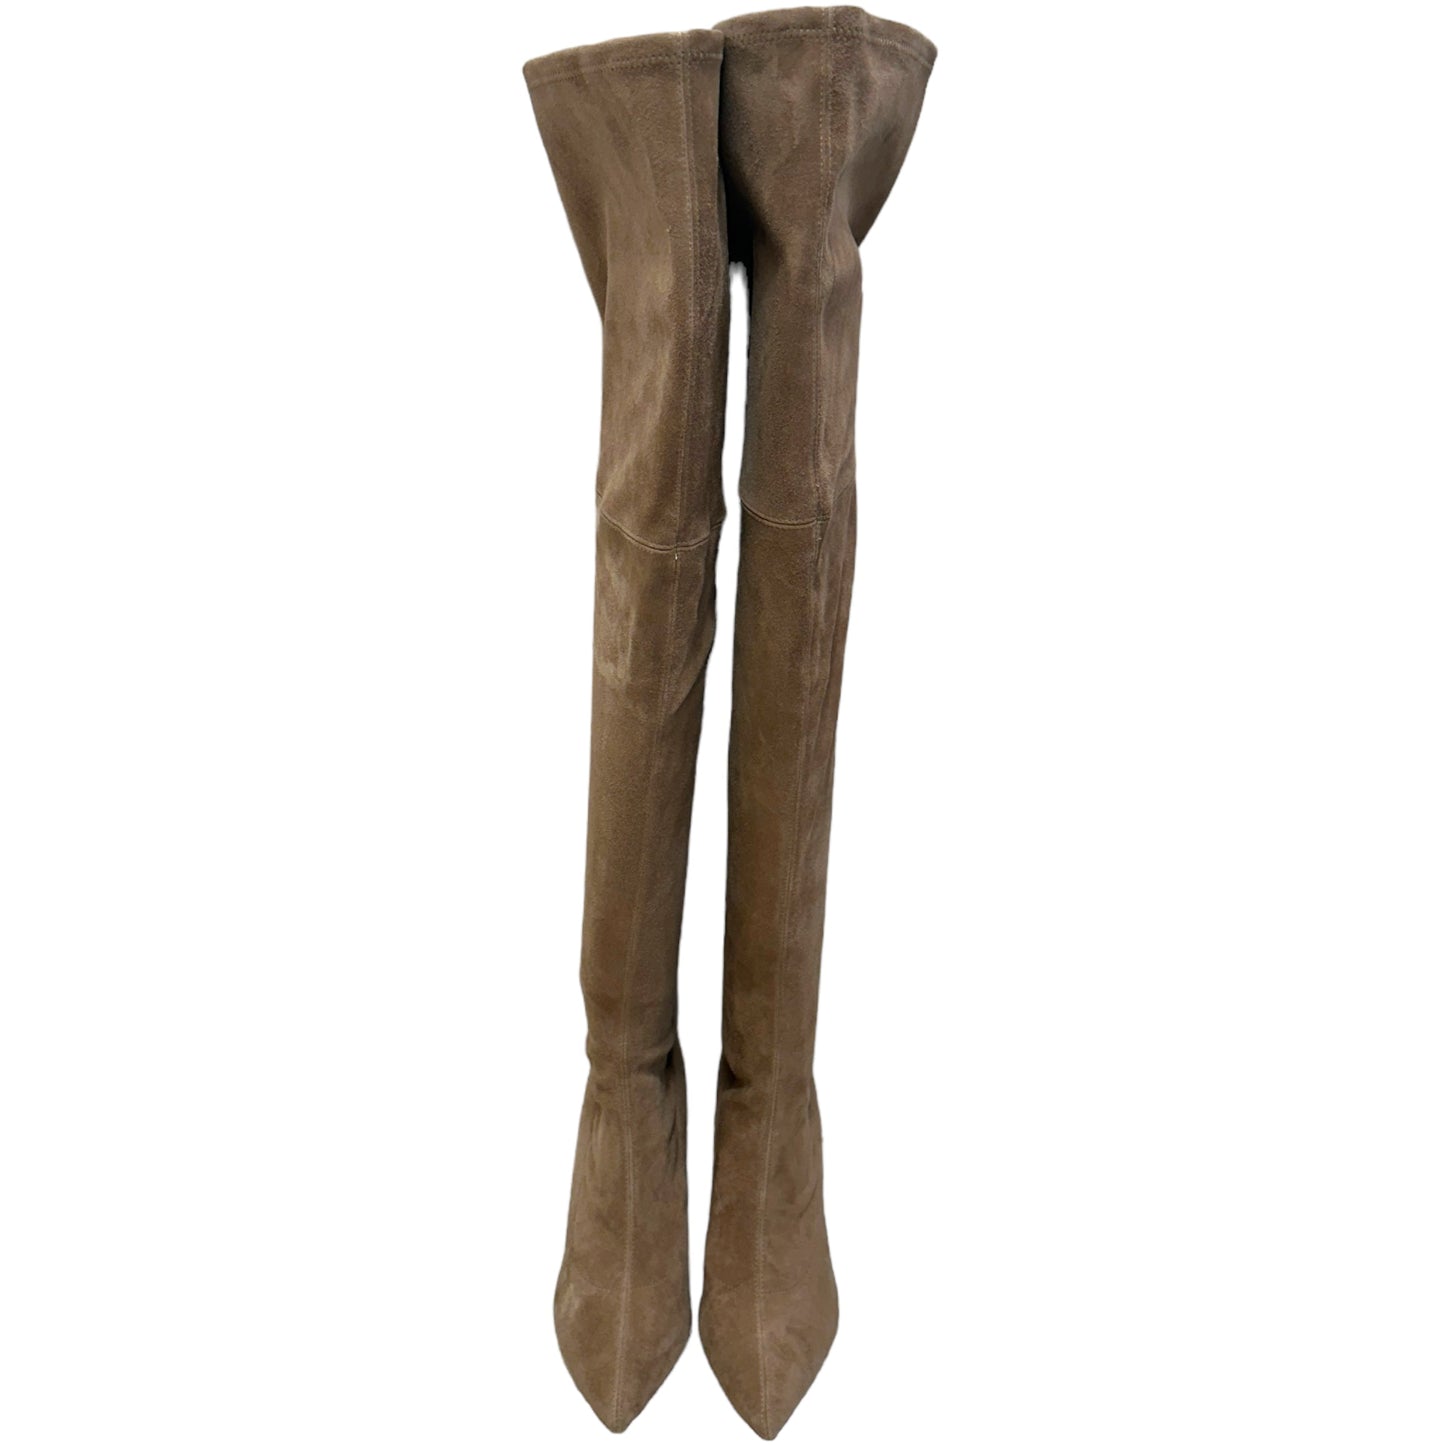 Shea Suede Thigh High Boots -Taupe By Coach  Size: 9